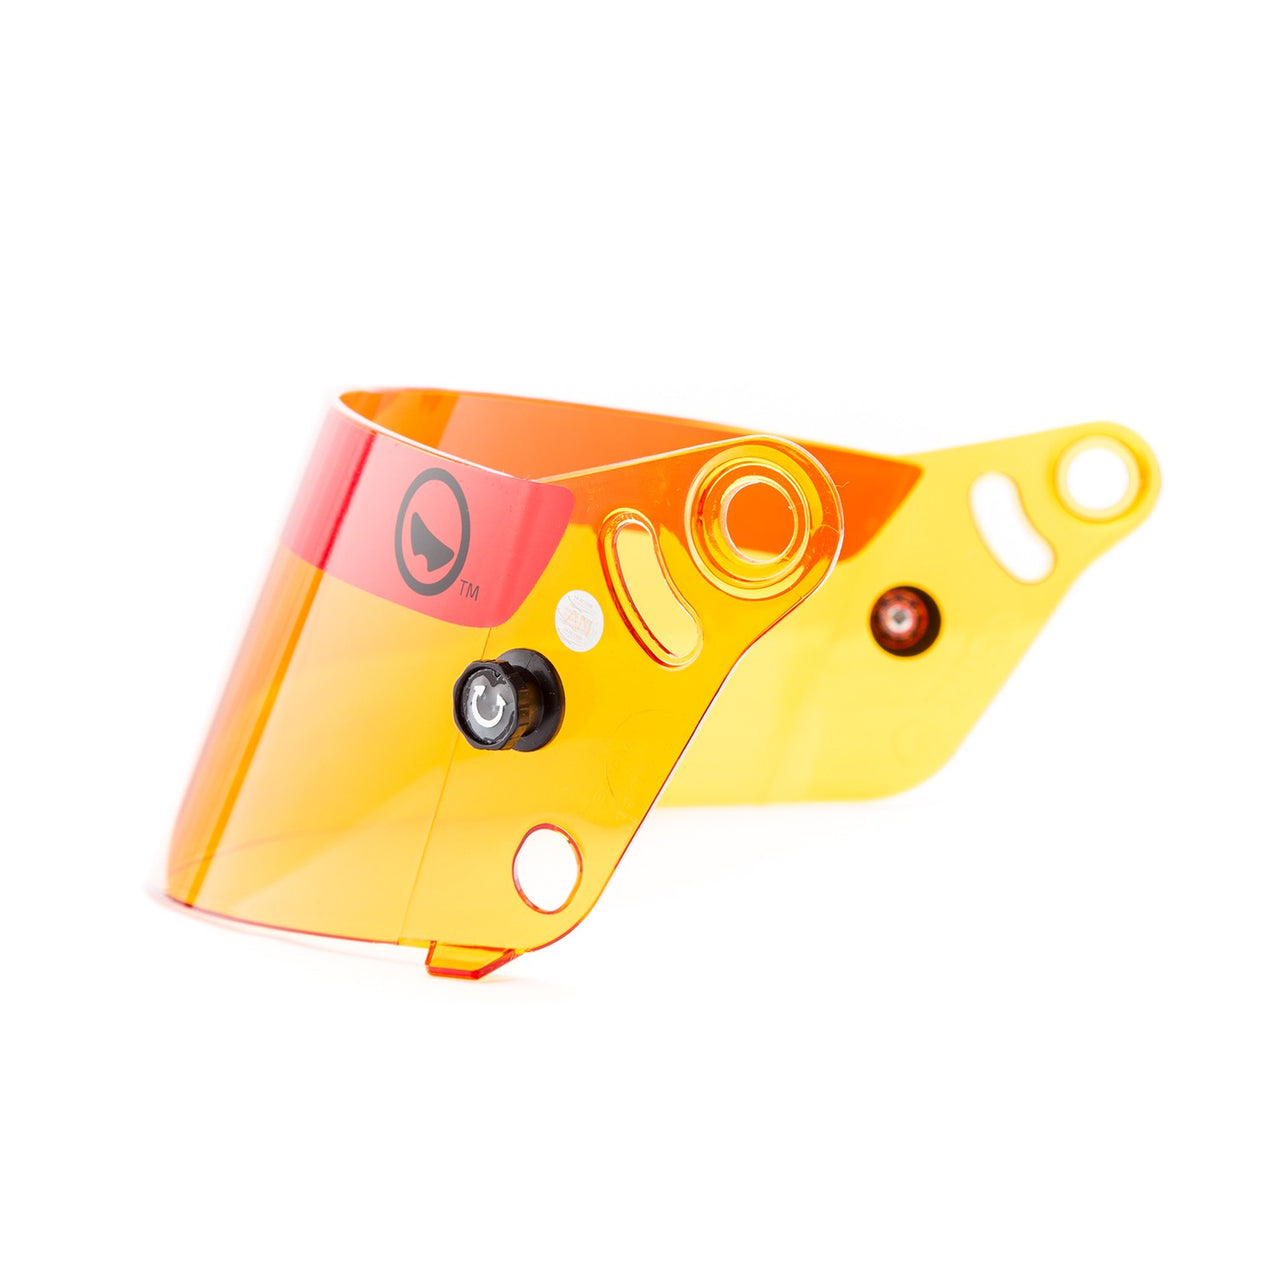 Roux Amber/Yellow Shield, Fits Roux R-1 Helmets | Roux RXHS01-15999